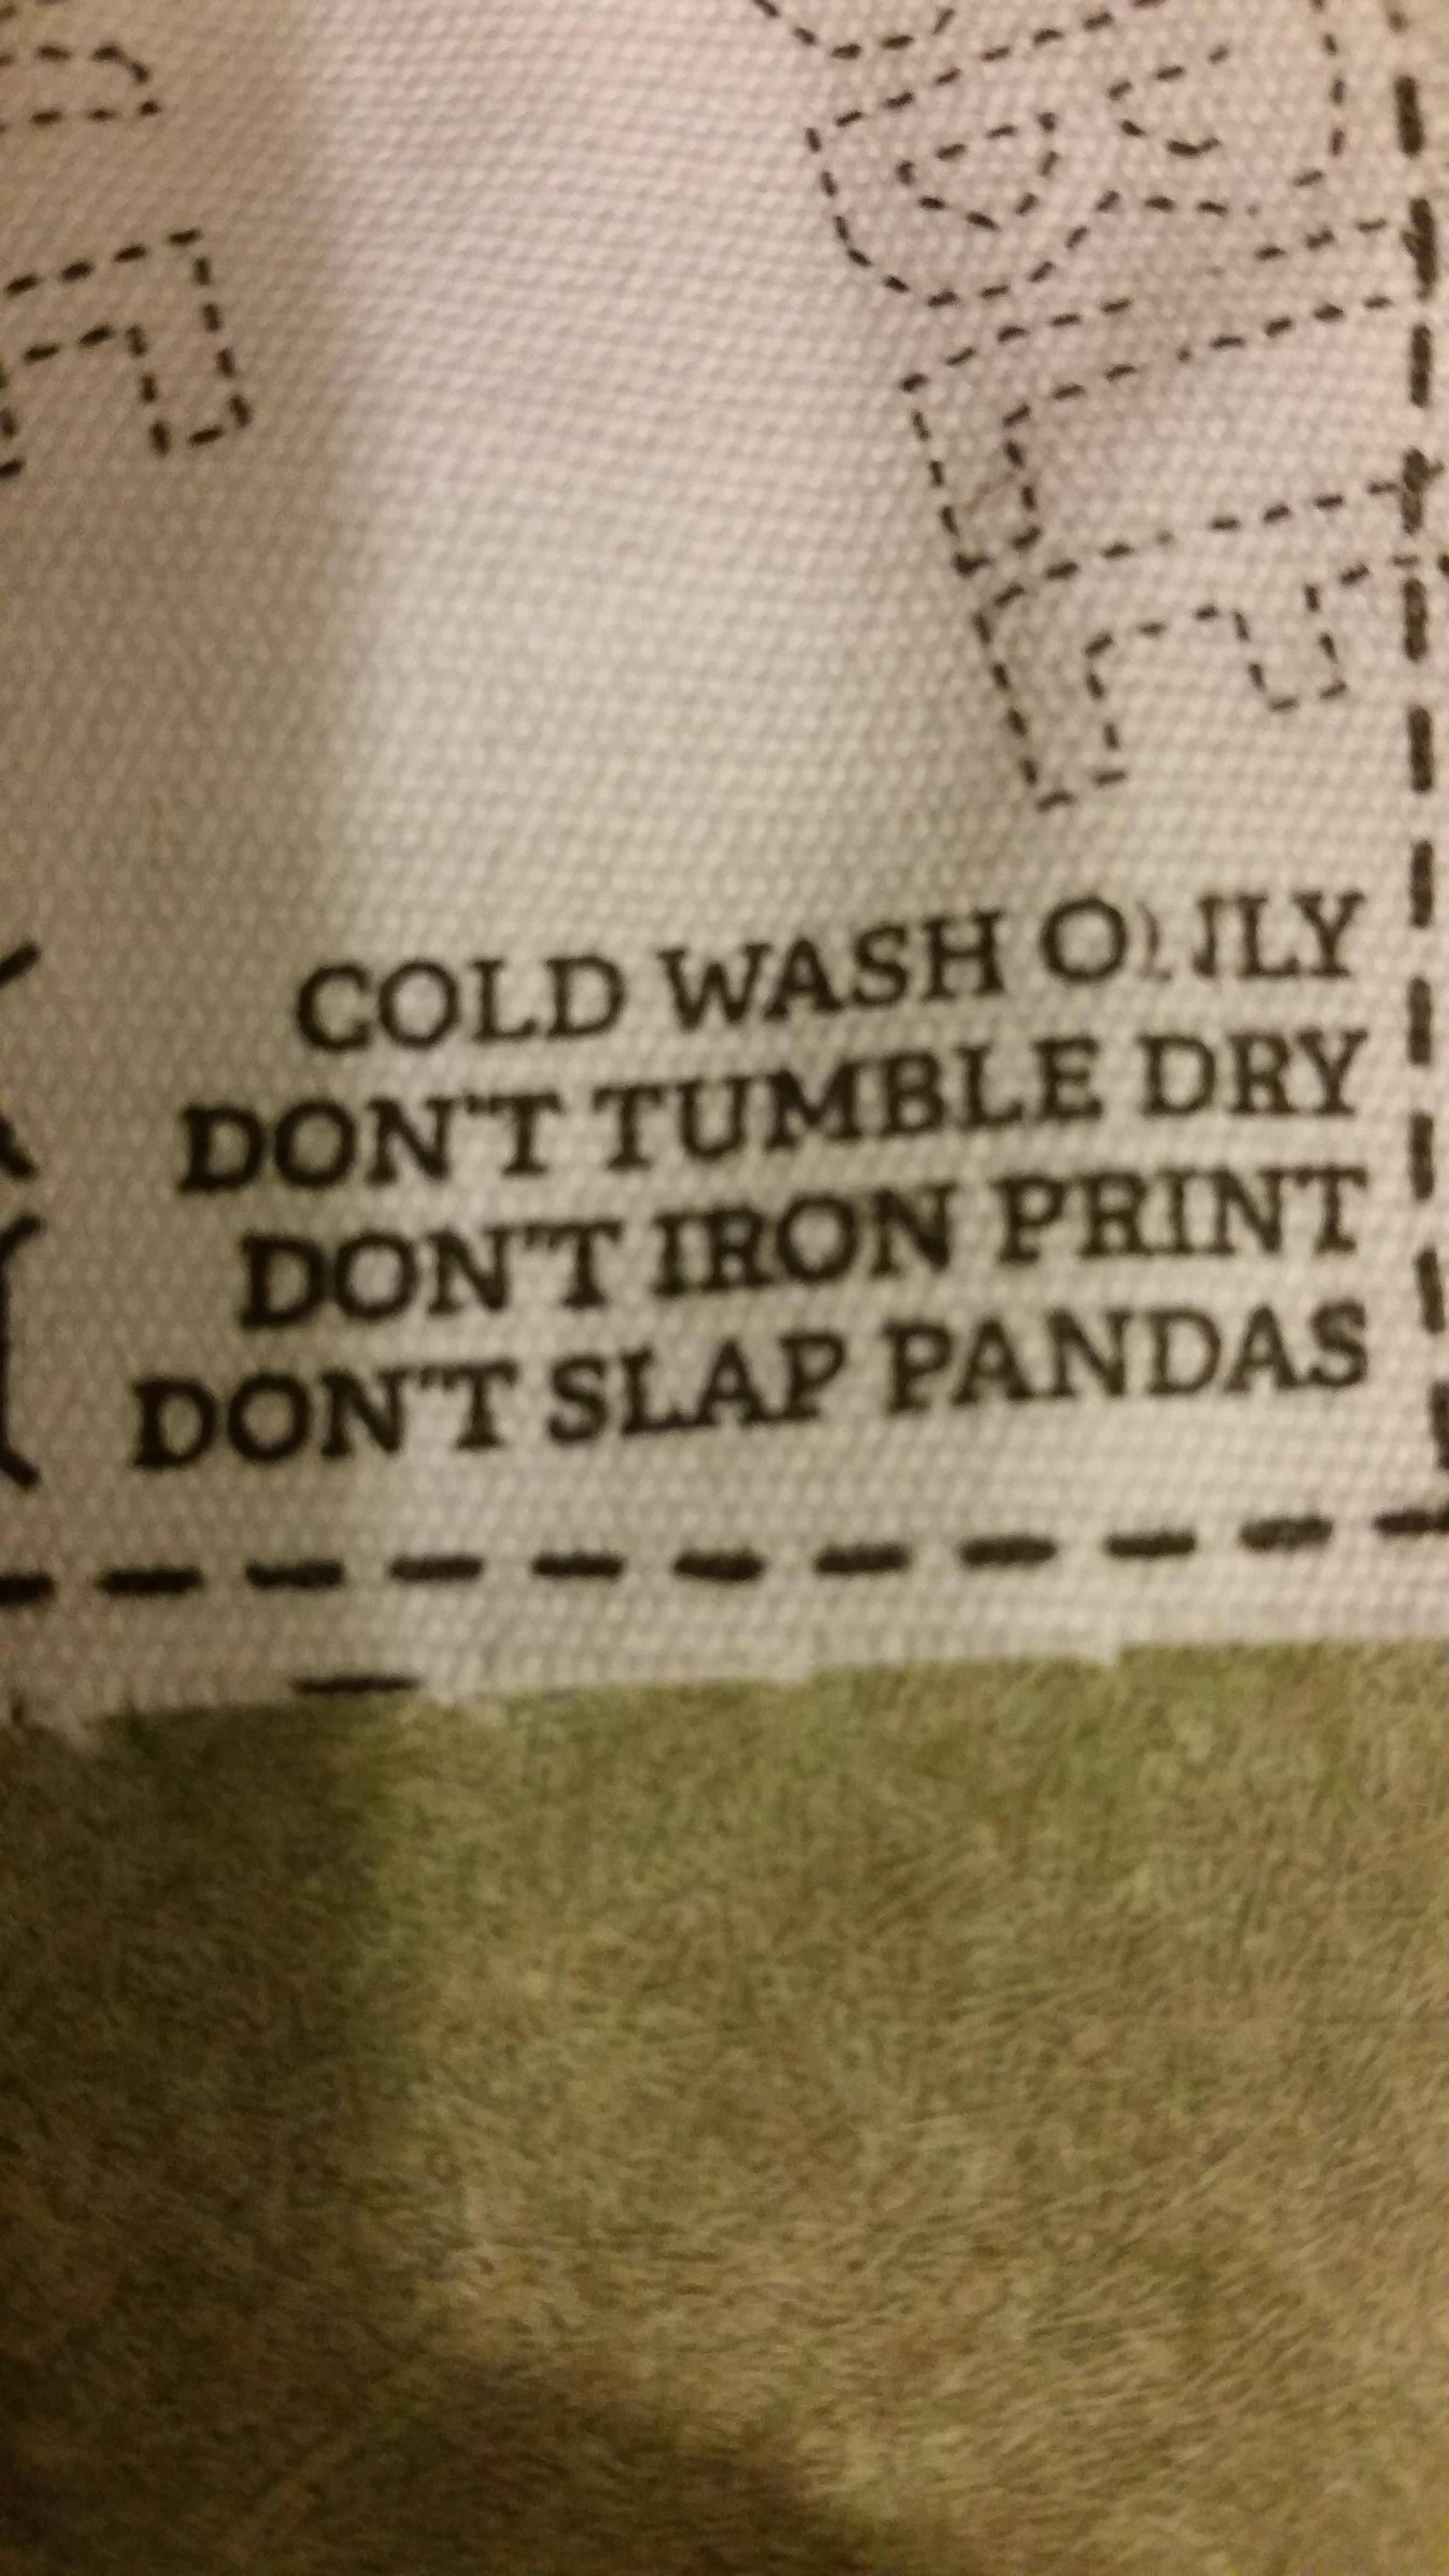 This warning label from my new shirt